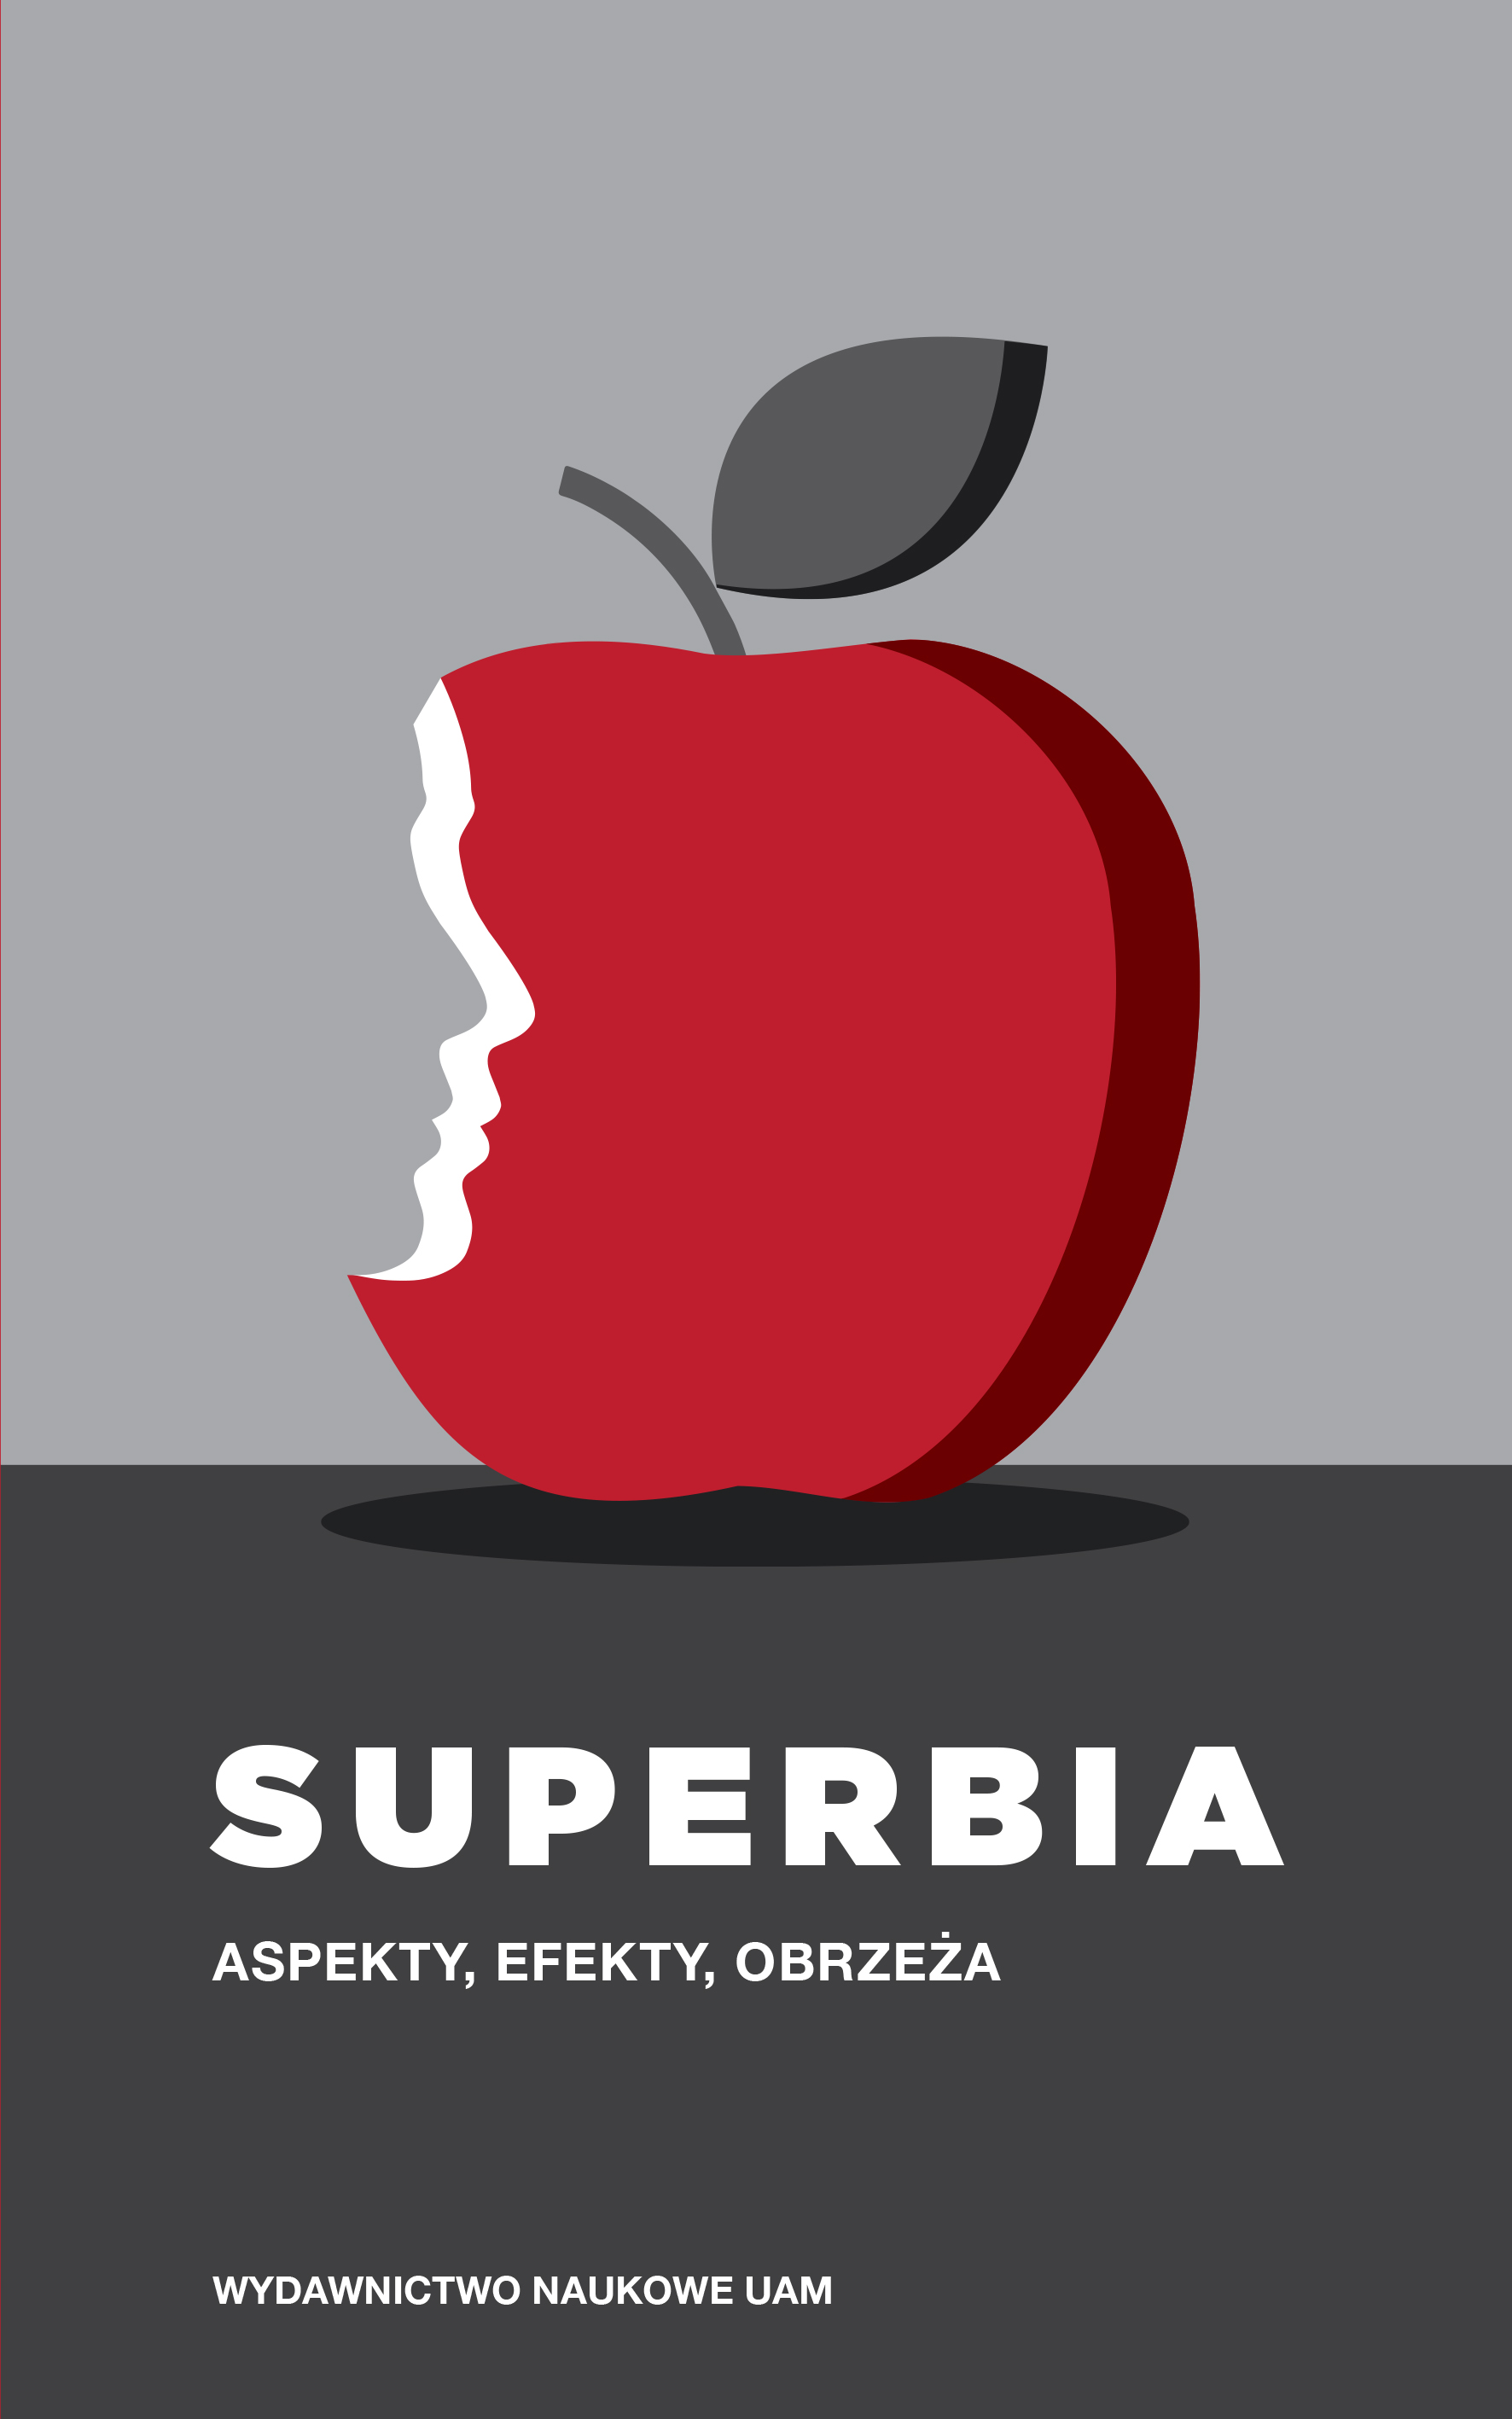 SUPERBIA. Aspects, effects, edges